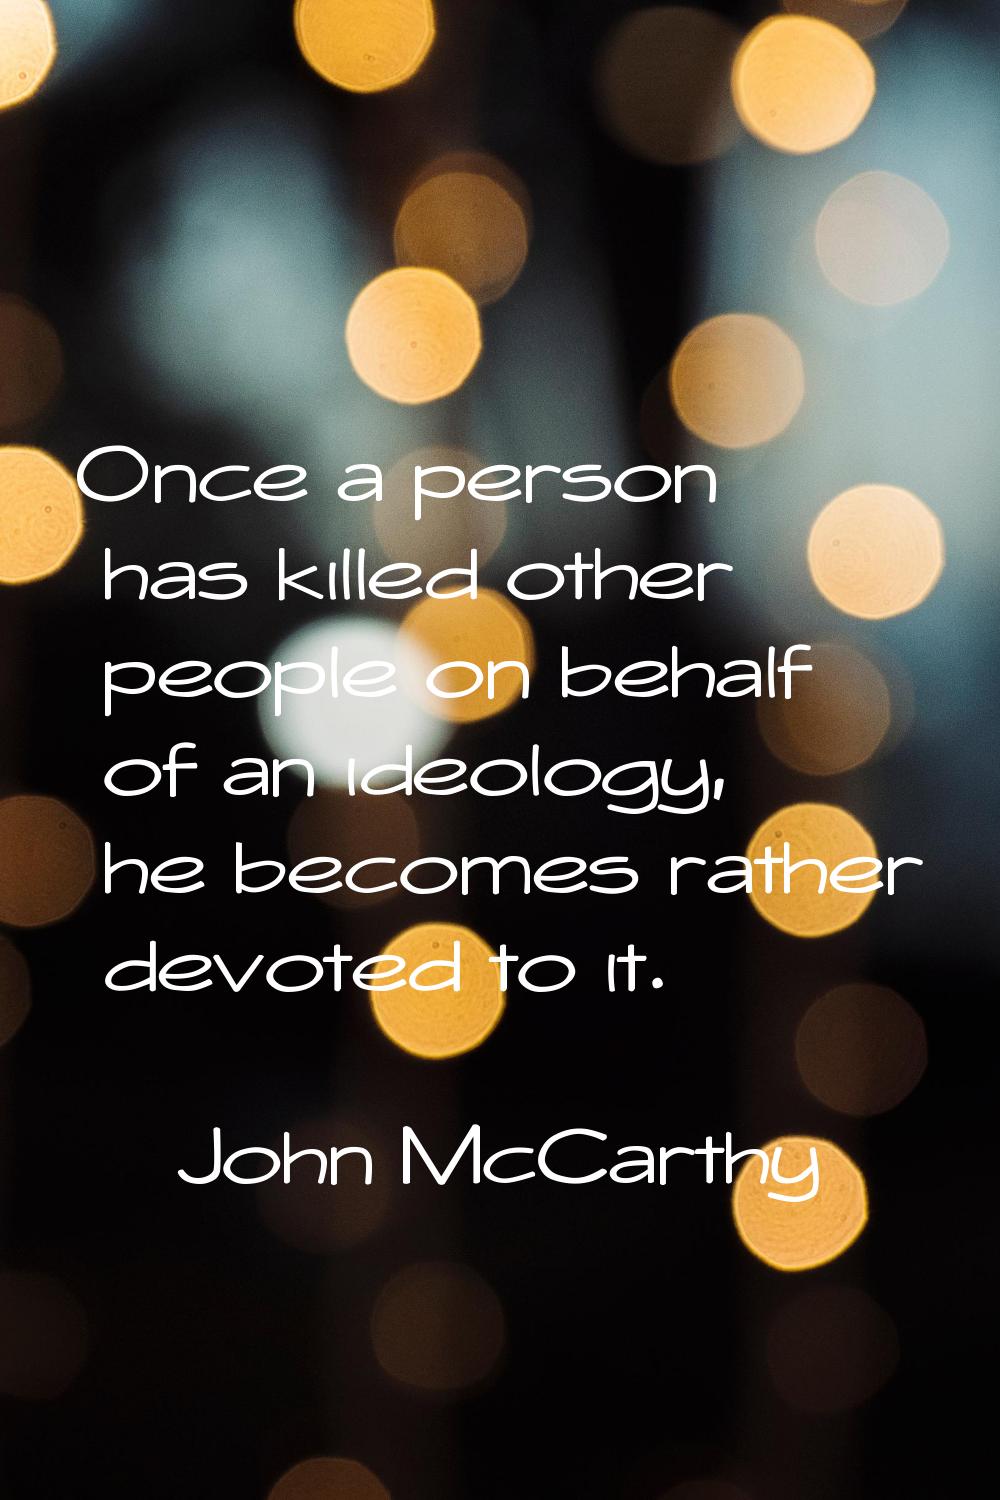 Once a person has killed other people on behalf of an ideology, he becomes rather devoted to it.